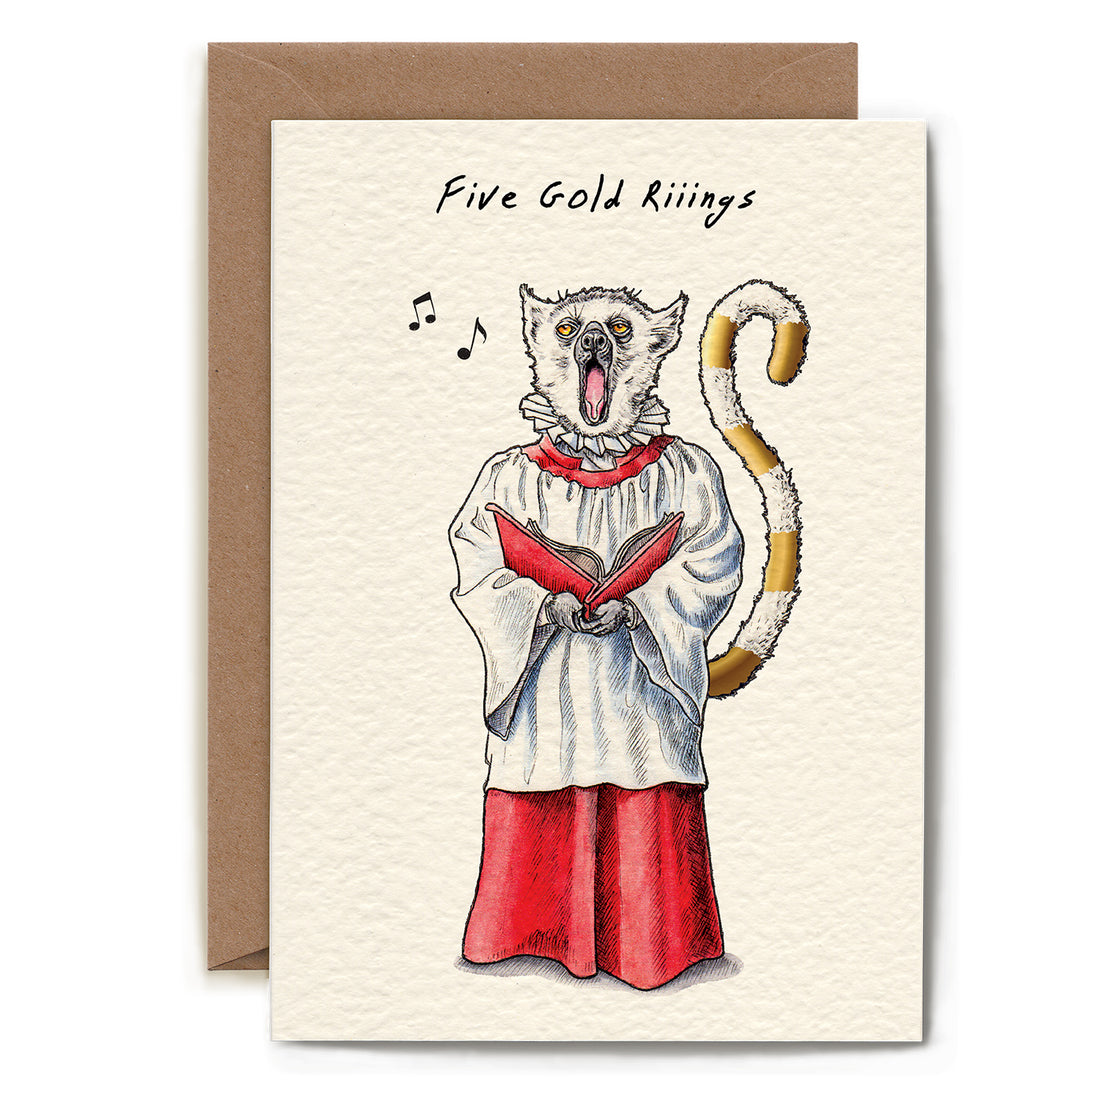 Illustration of a cat dressed in choir attire singing &quot;five gold rings&quot; from the &quot;twelve days of christmas&quot; song, featured on a Five Gold Rings Card by UK based stationery company Hester &amp; Cook.